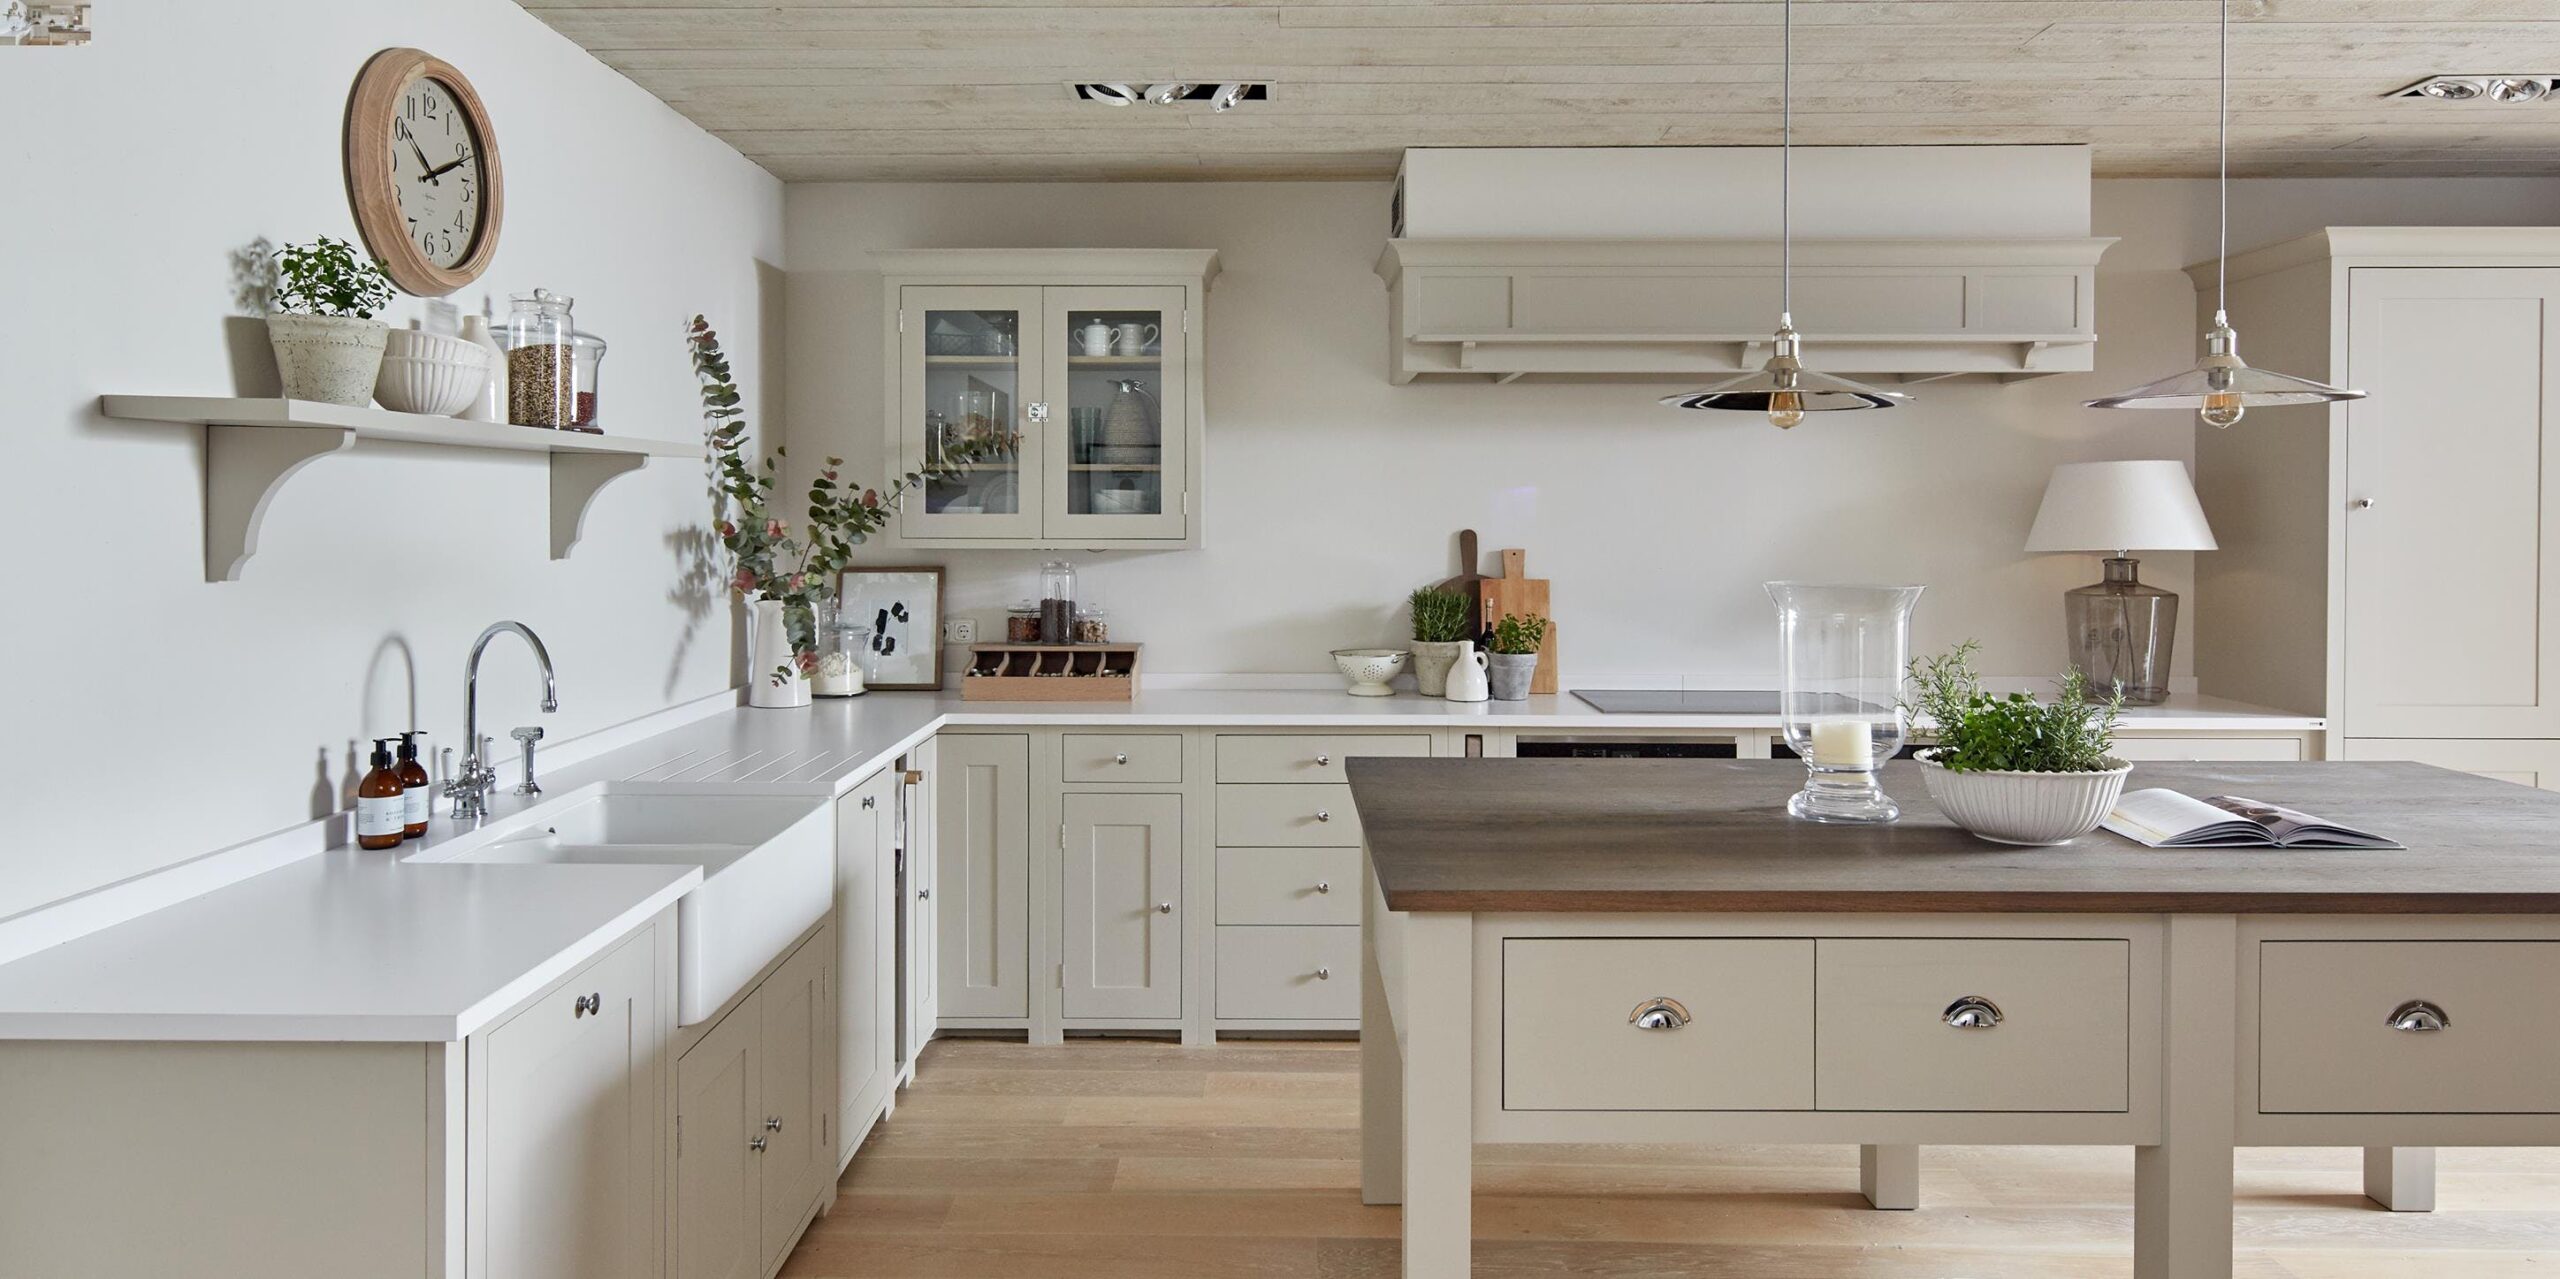 Image of Rustic kitchen 0 2 scaled in Kitchens - Cosentino